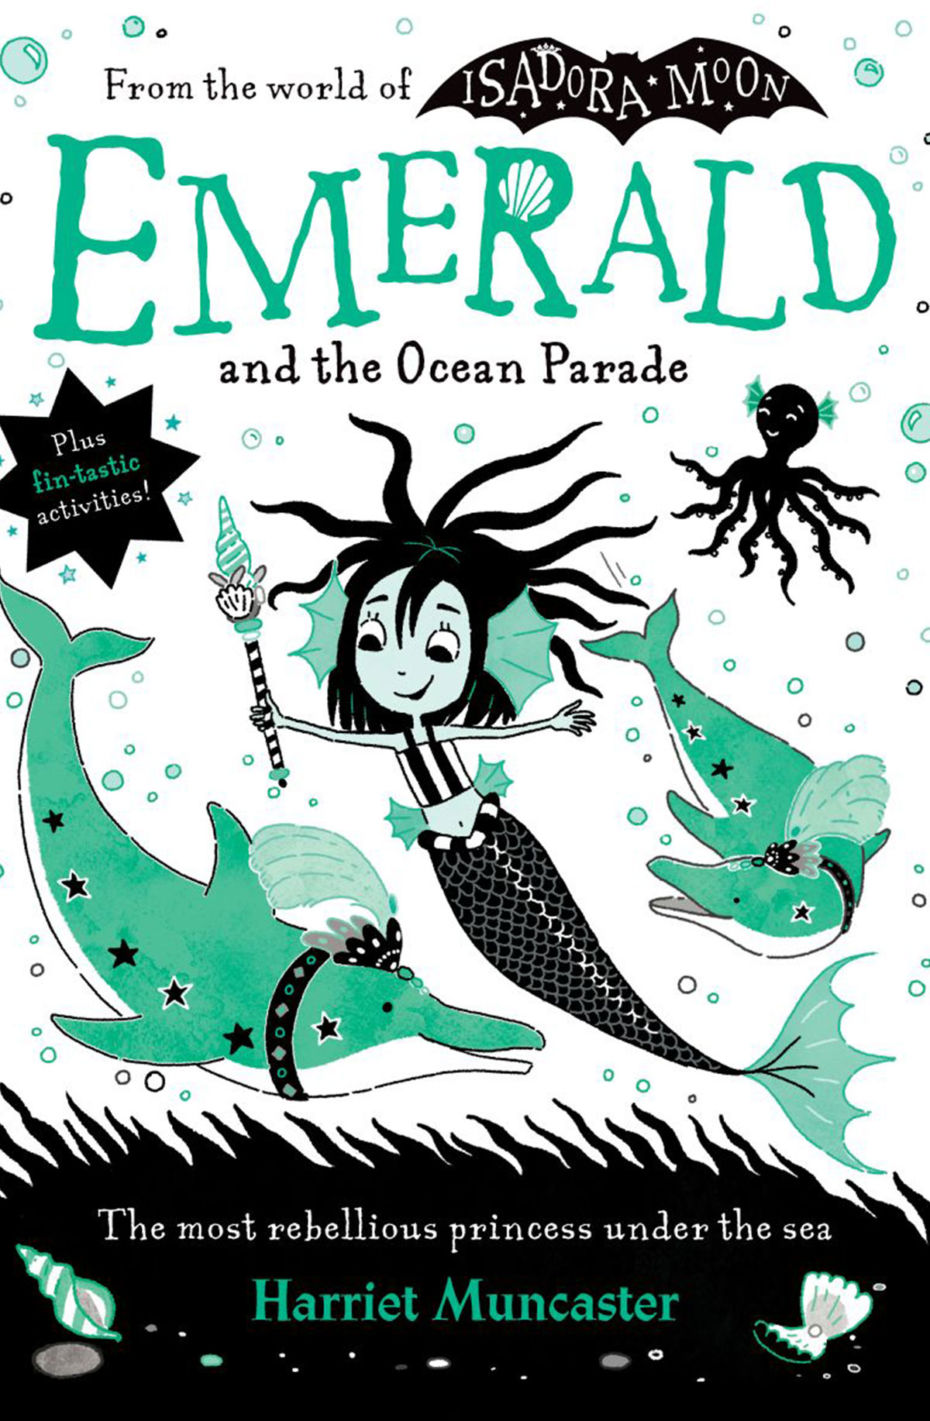 Book jacket for EMERALD AND THE OCEAN PARADE